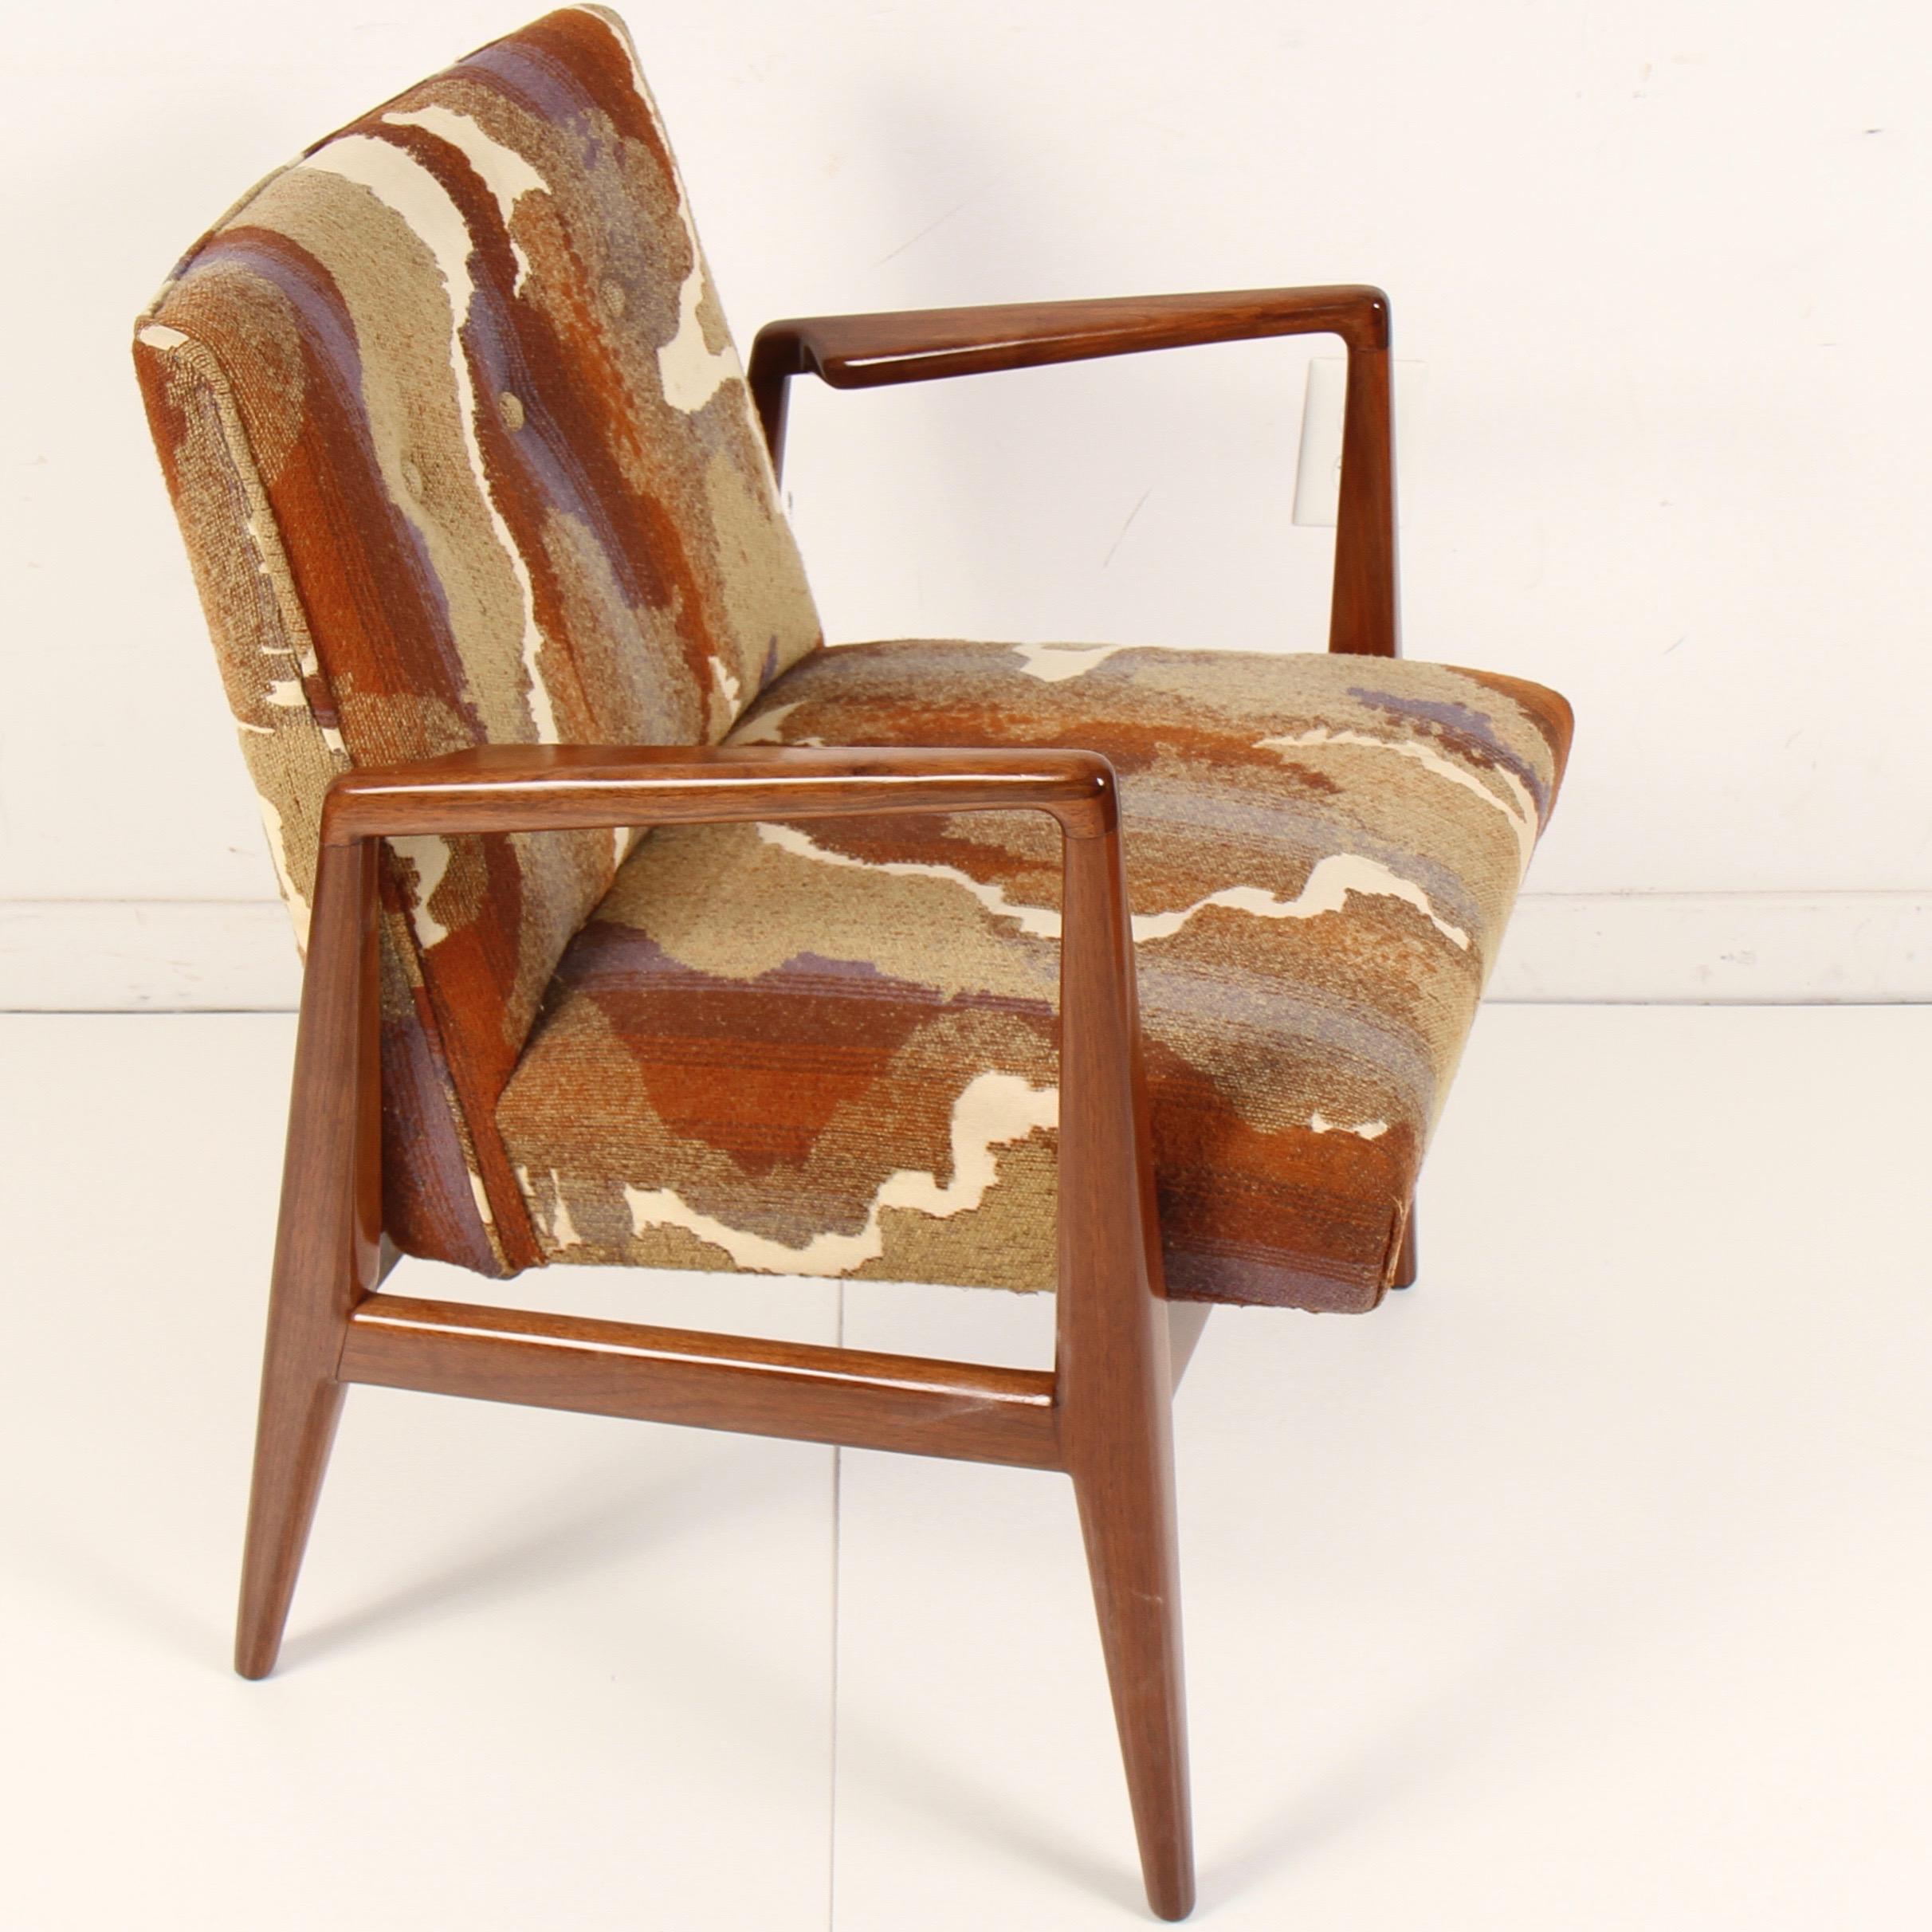 Newly refinished 1960s vintage lounge chair by Jens Risom for Risom Design.